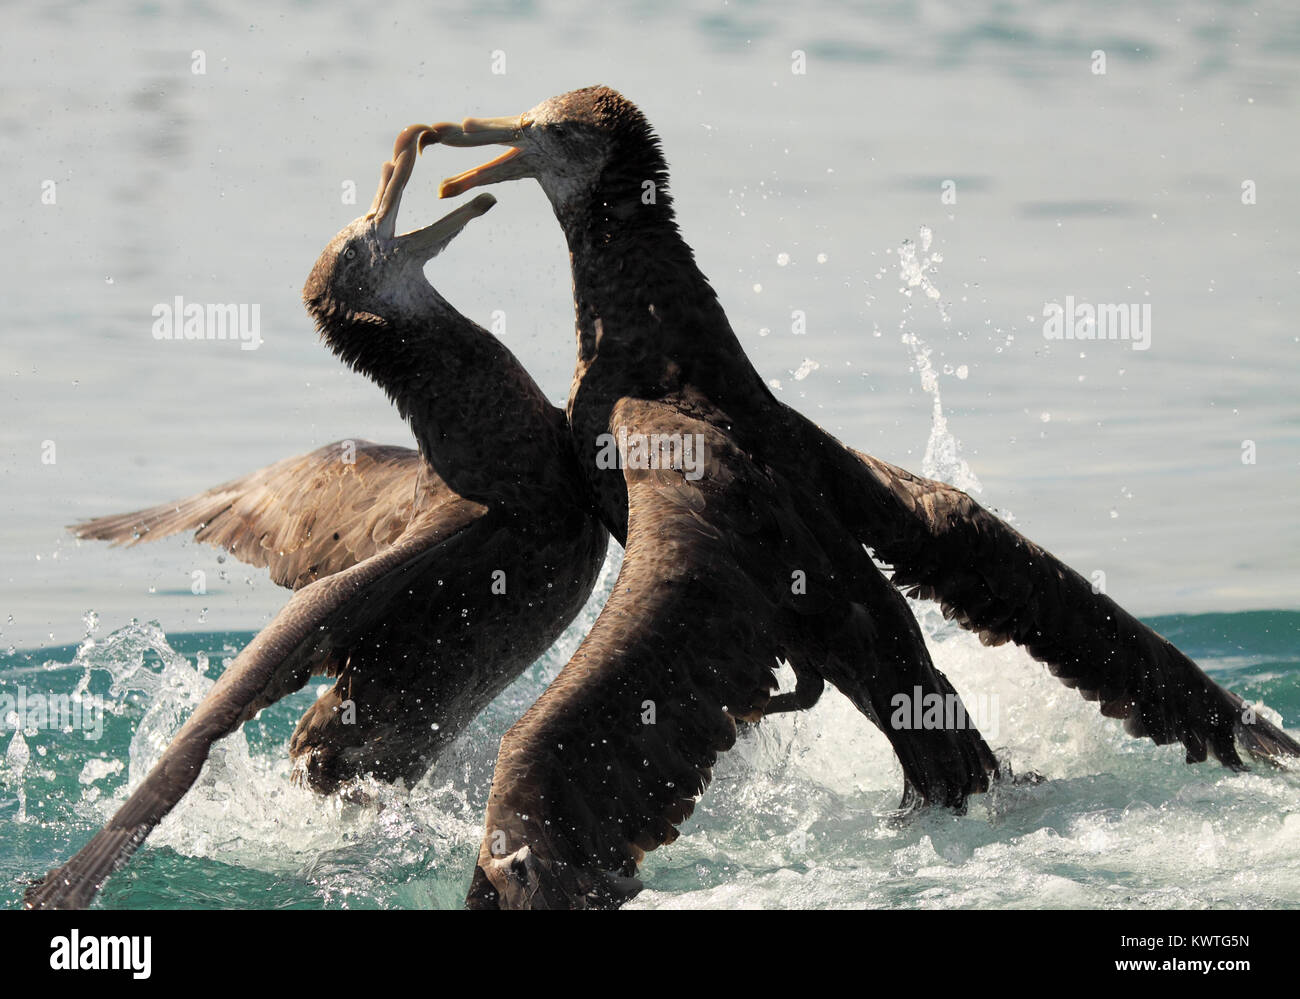 A pair of Northern Giant Petrels snapping and biting during a fight off the coast of New Zealand. Stock Photo